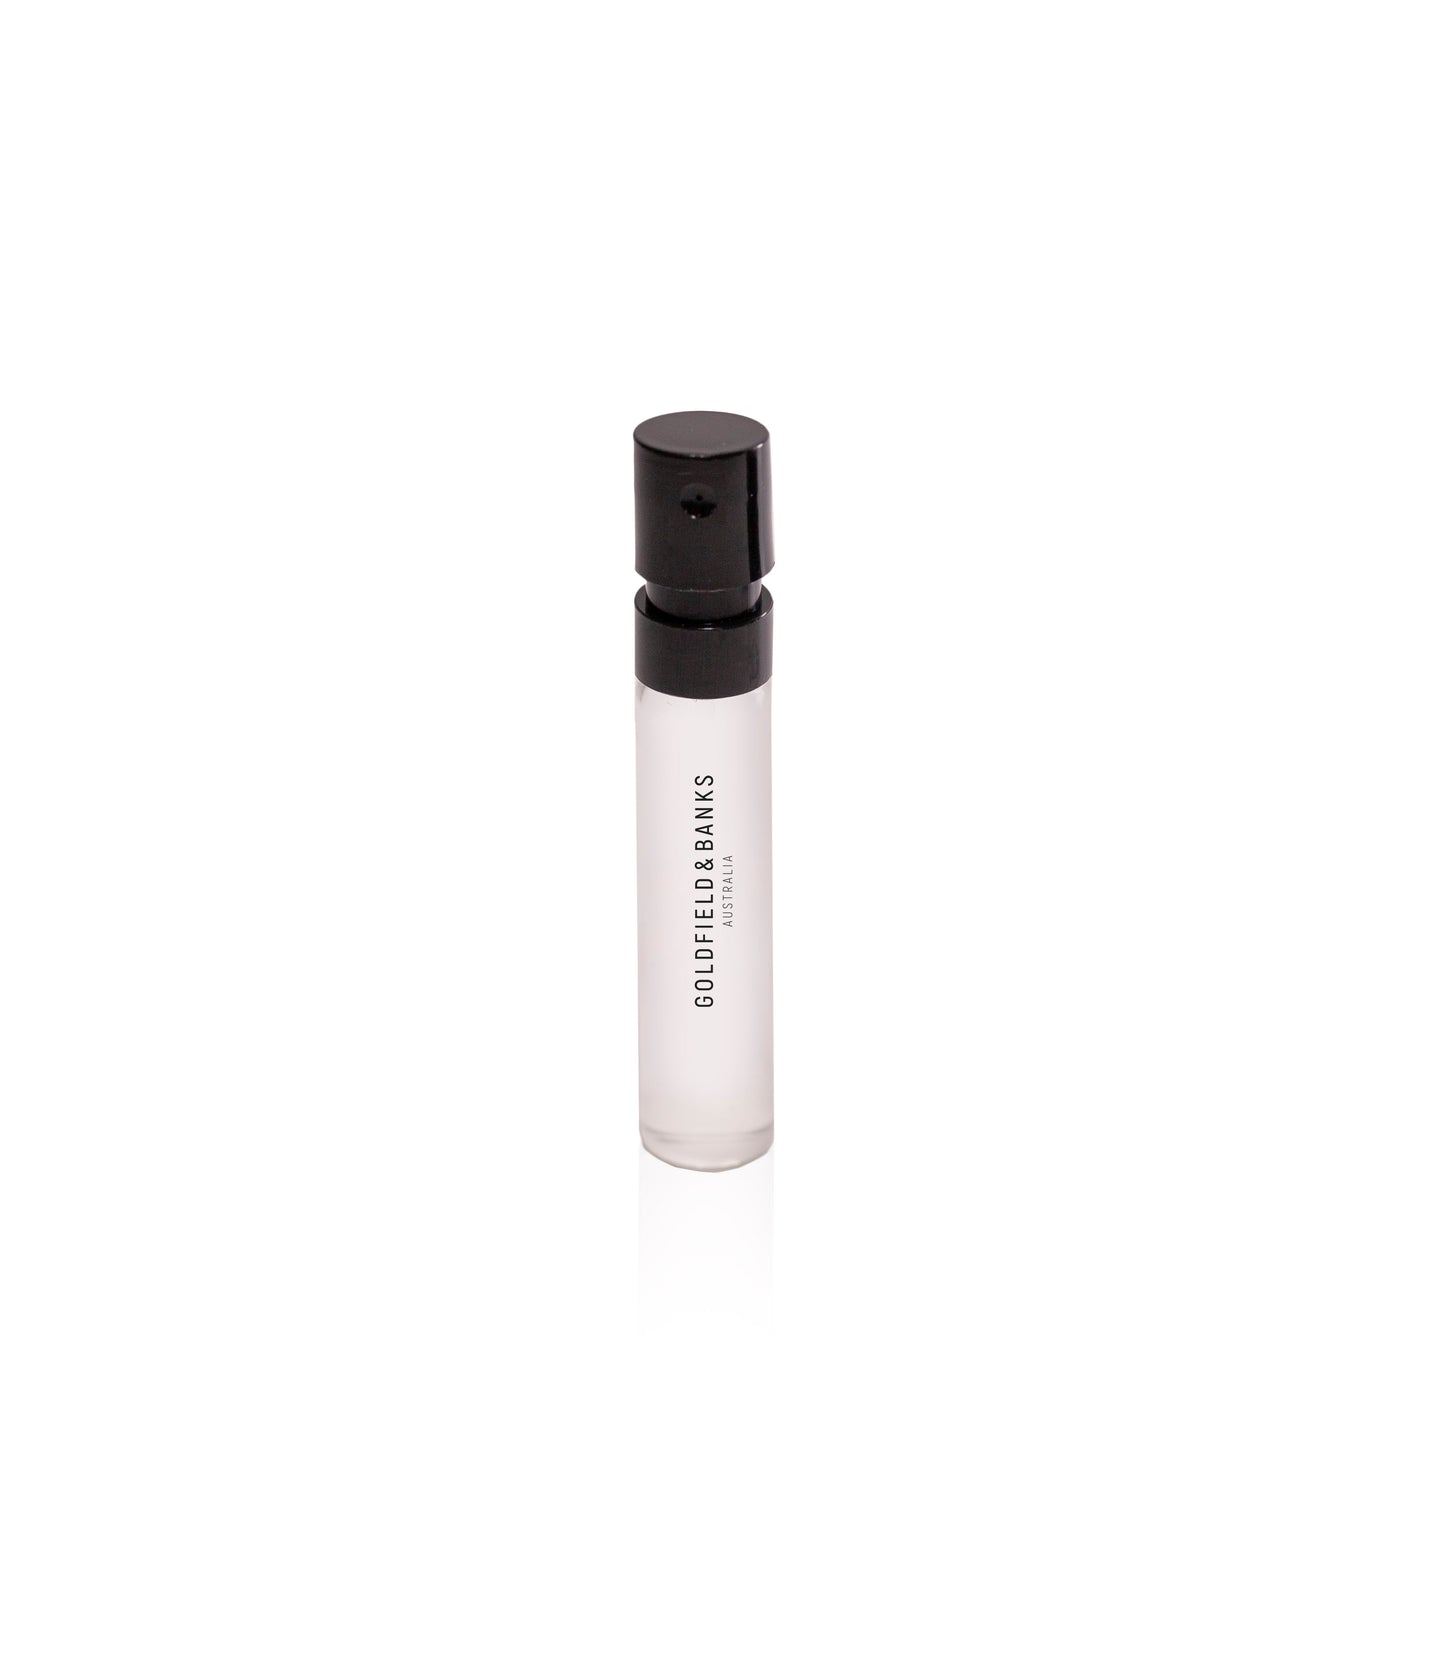 Sunset Hour 1.5ml Sample Vial - Perfume Concentrate